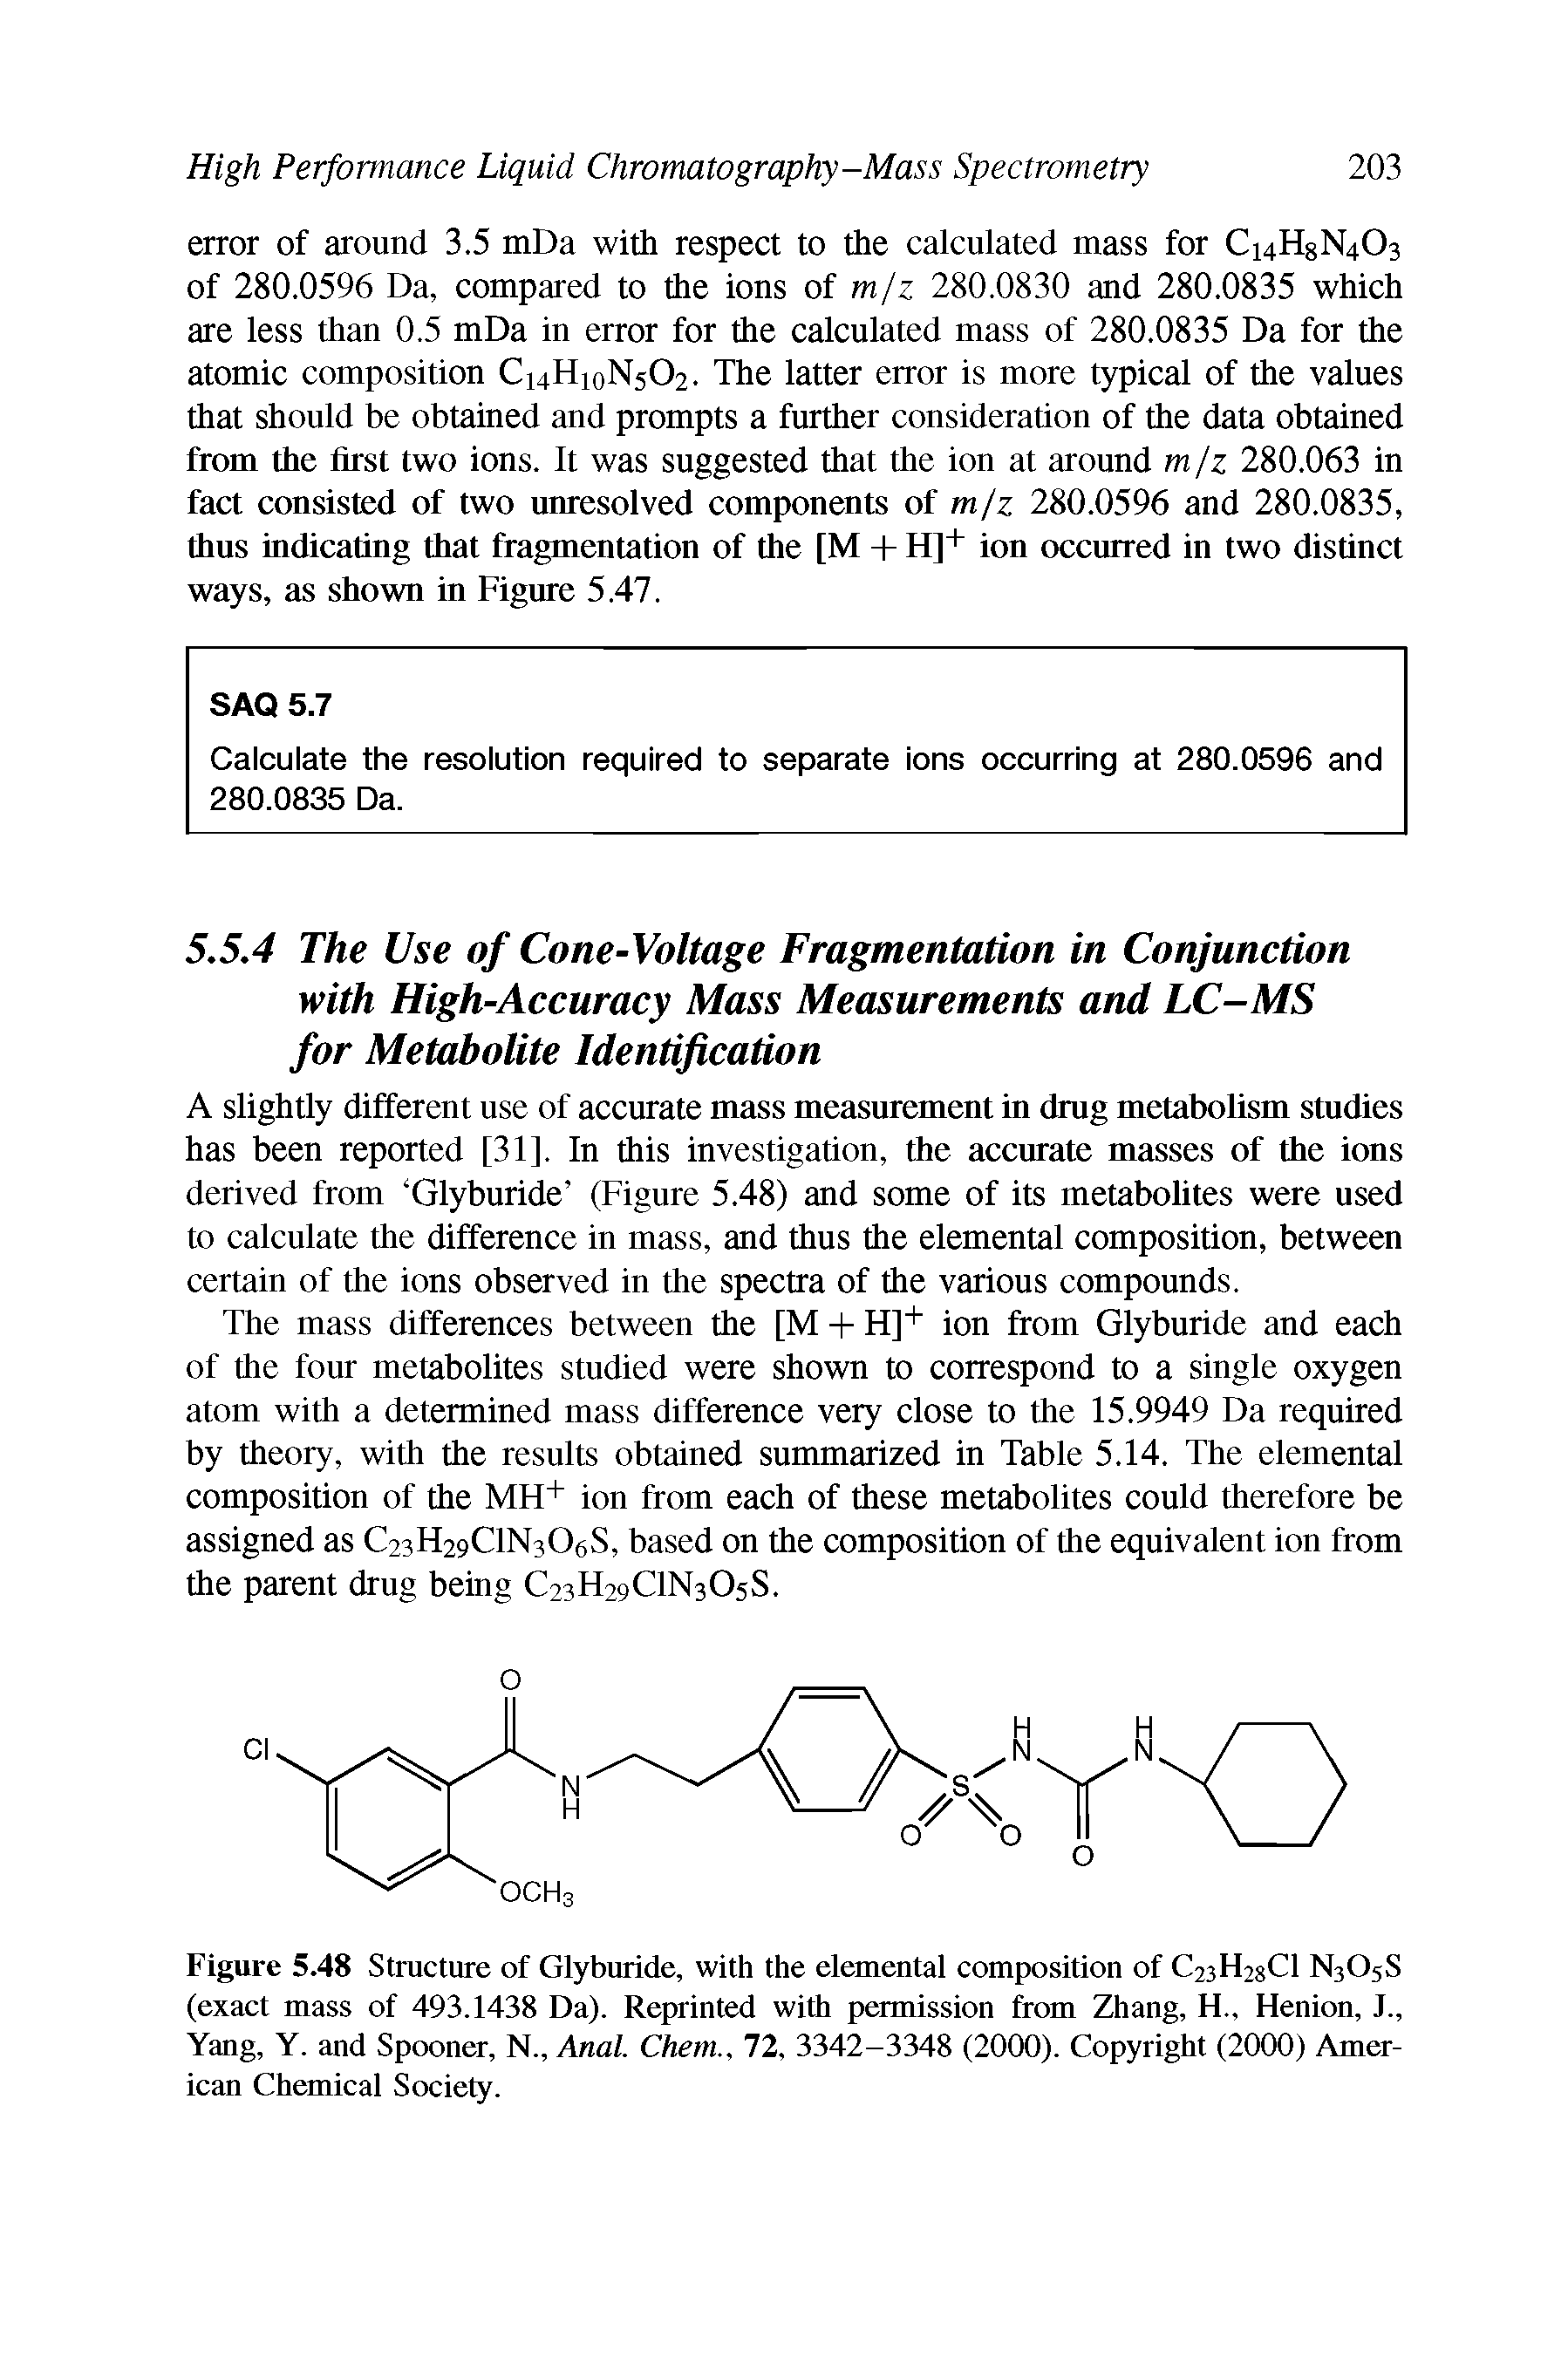 Figure 5.48 Structure of Glyburide, with the elemental composition of C23H28CI N3O5S (exact mass of 493.1438 Da). Reprinted with permission from Zhang, H., Henion, J., Yang, Y. and Spooner, N., Anal Chem., 72, 3342-3348 (2000). Copyright (2000) American Chemical Society.